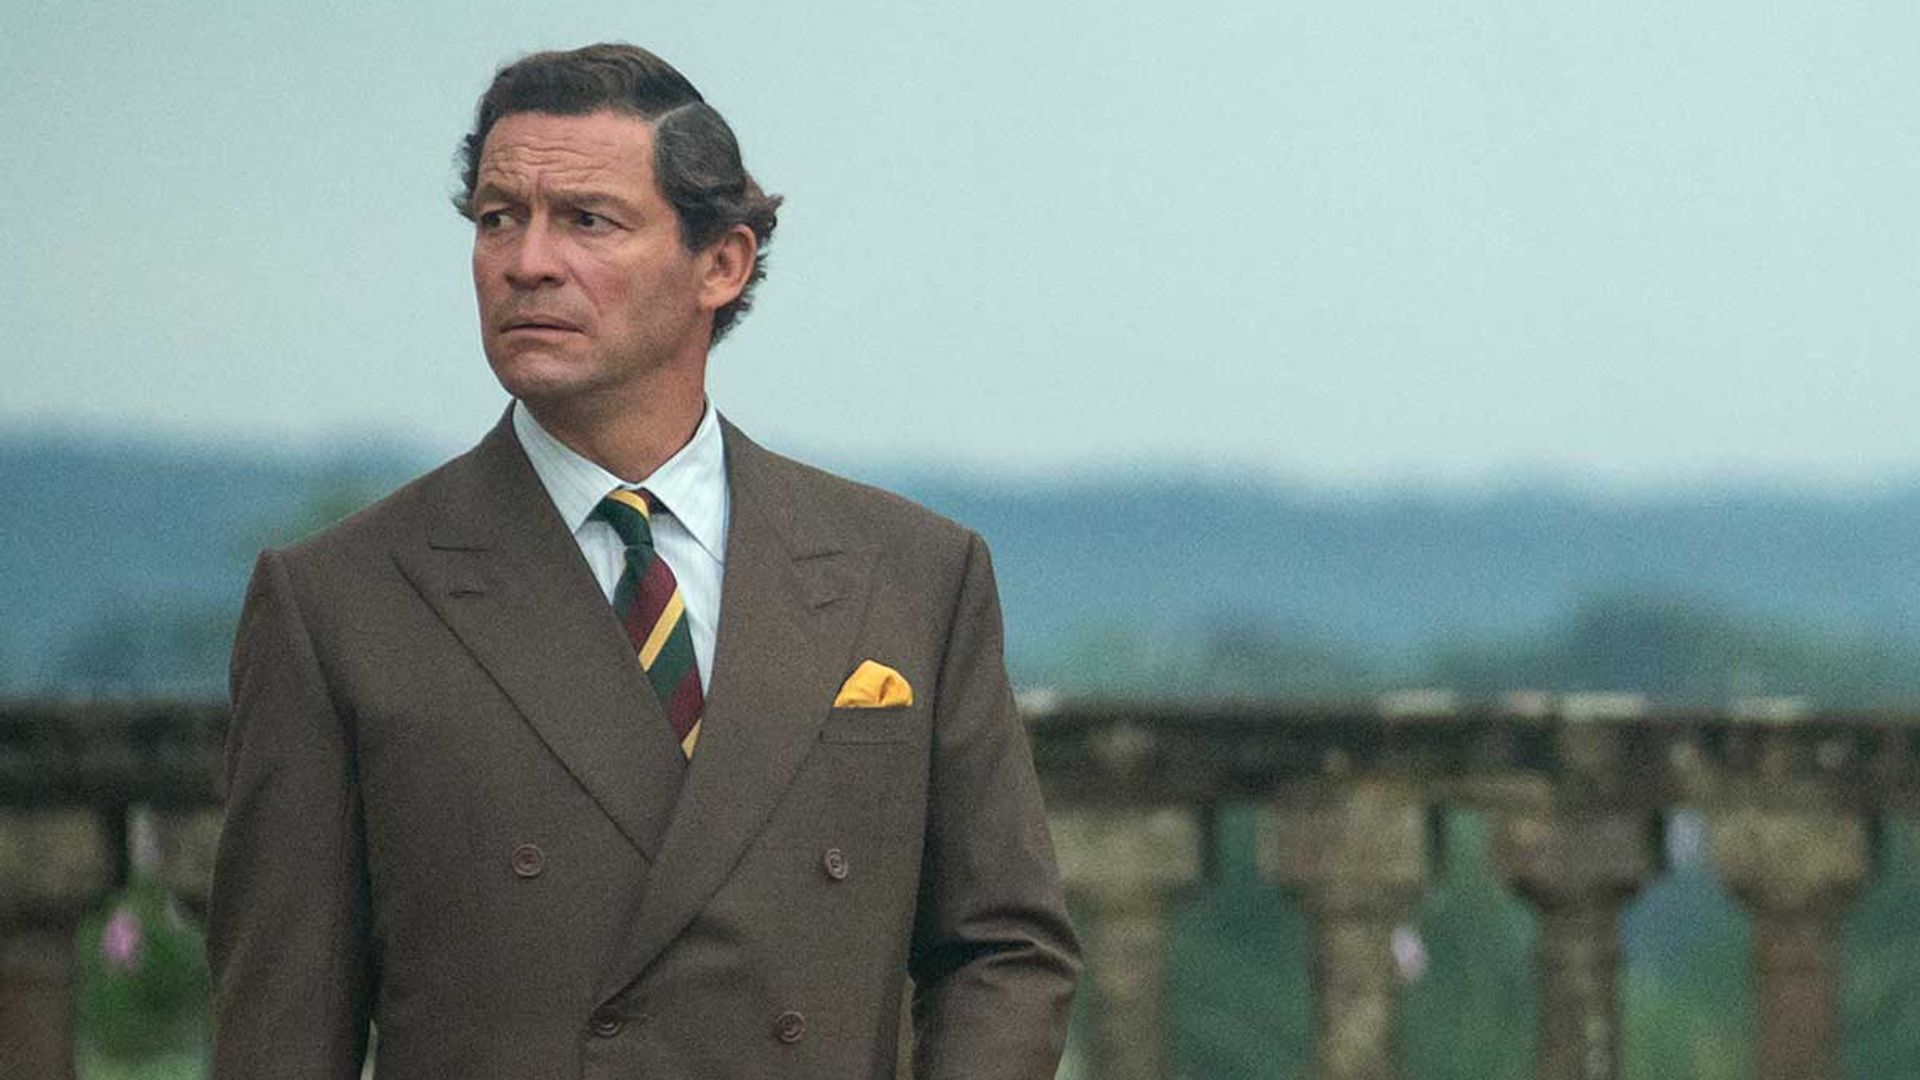  The Crown star Dominic West reveals surprise reaction to being cast as Prince Charles